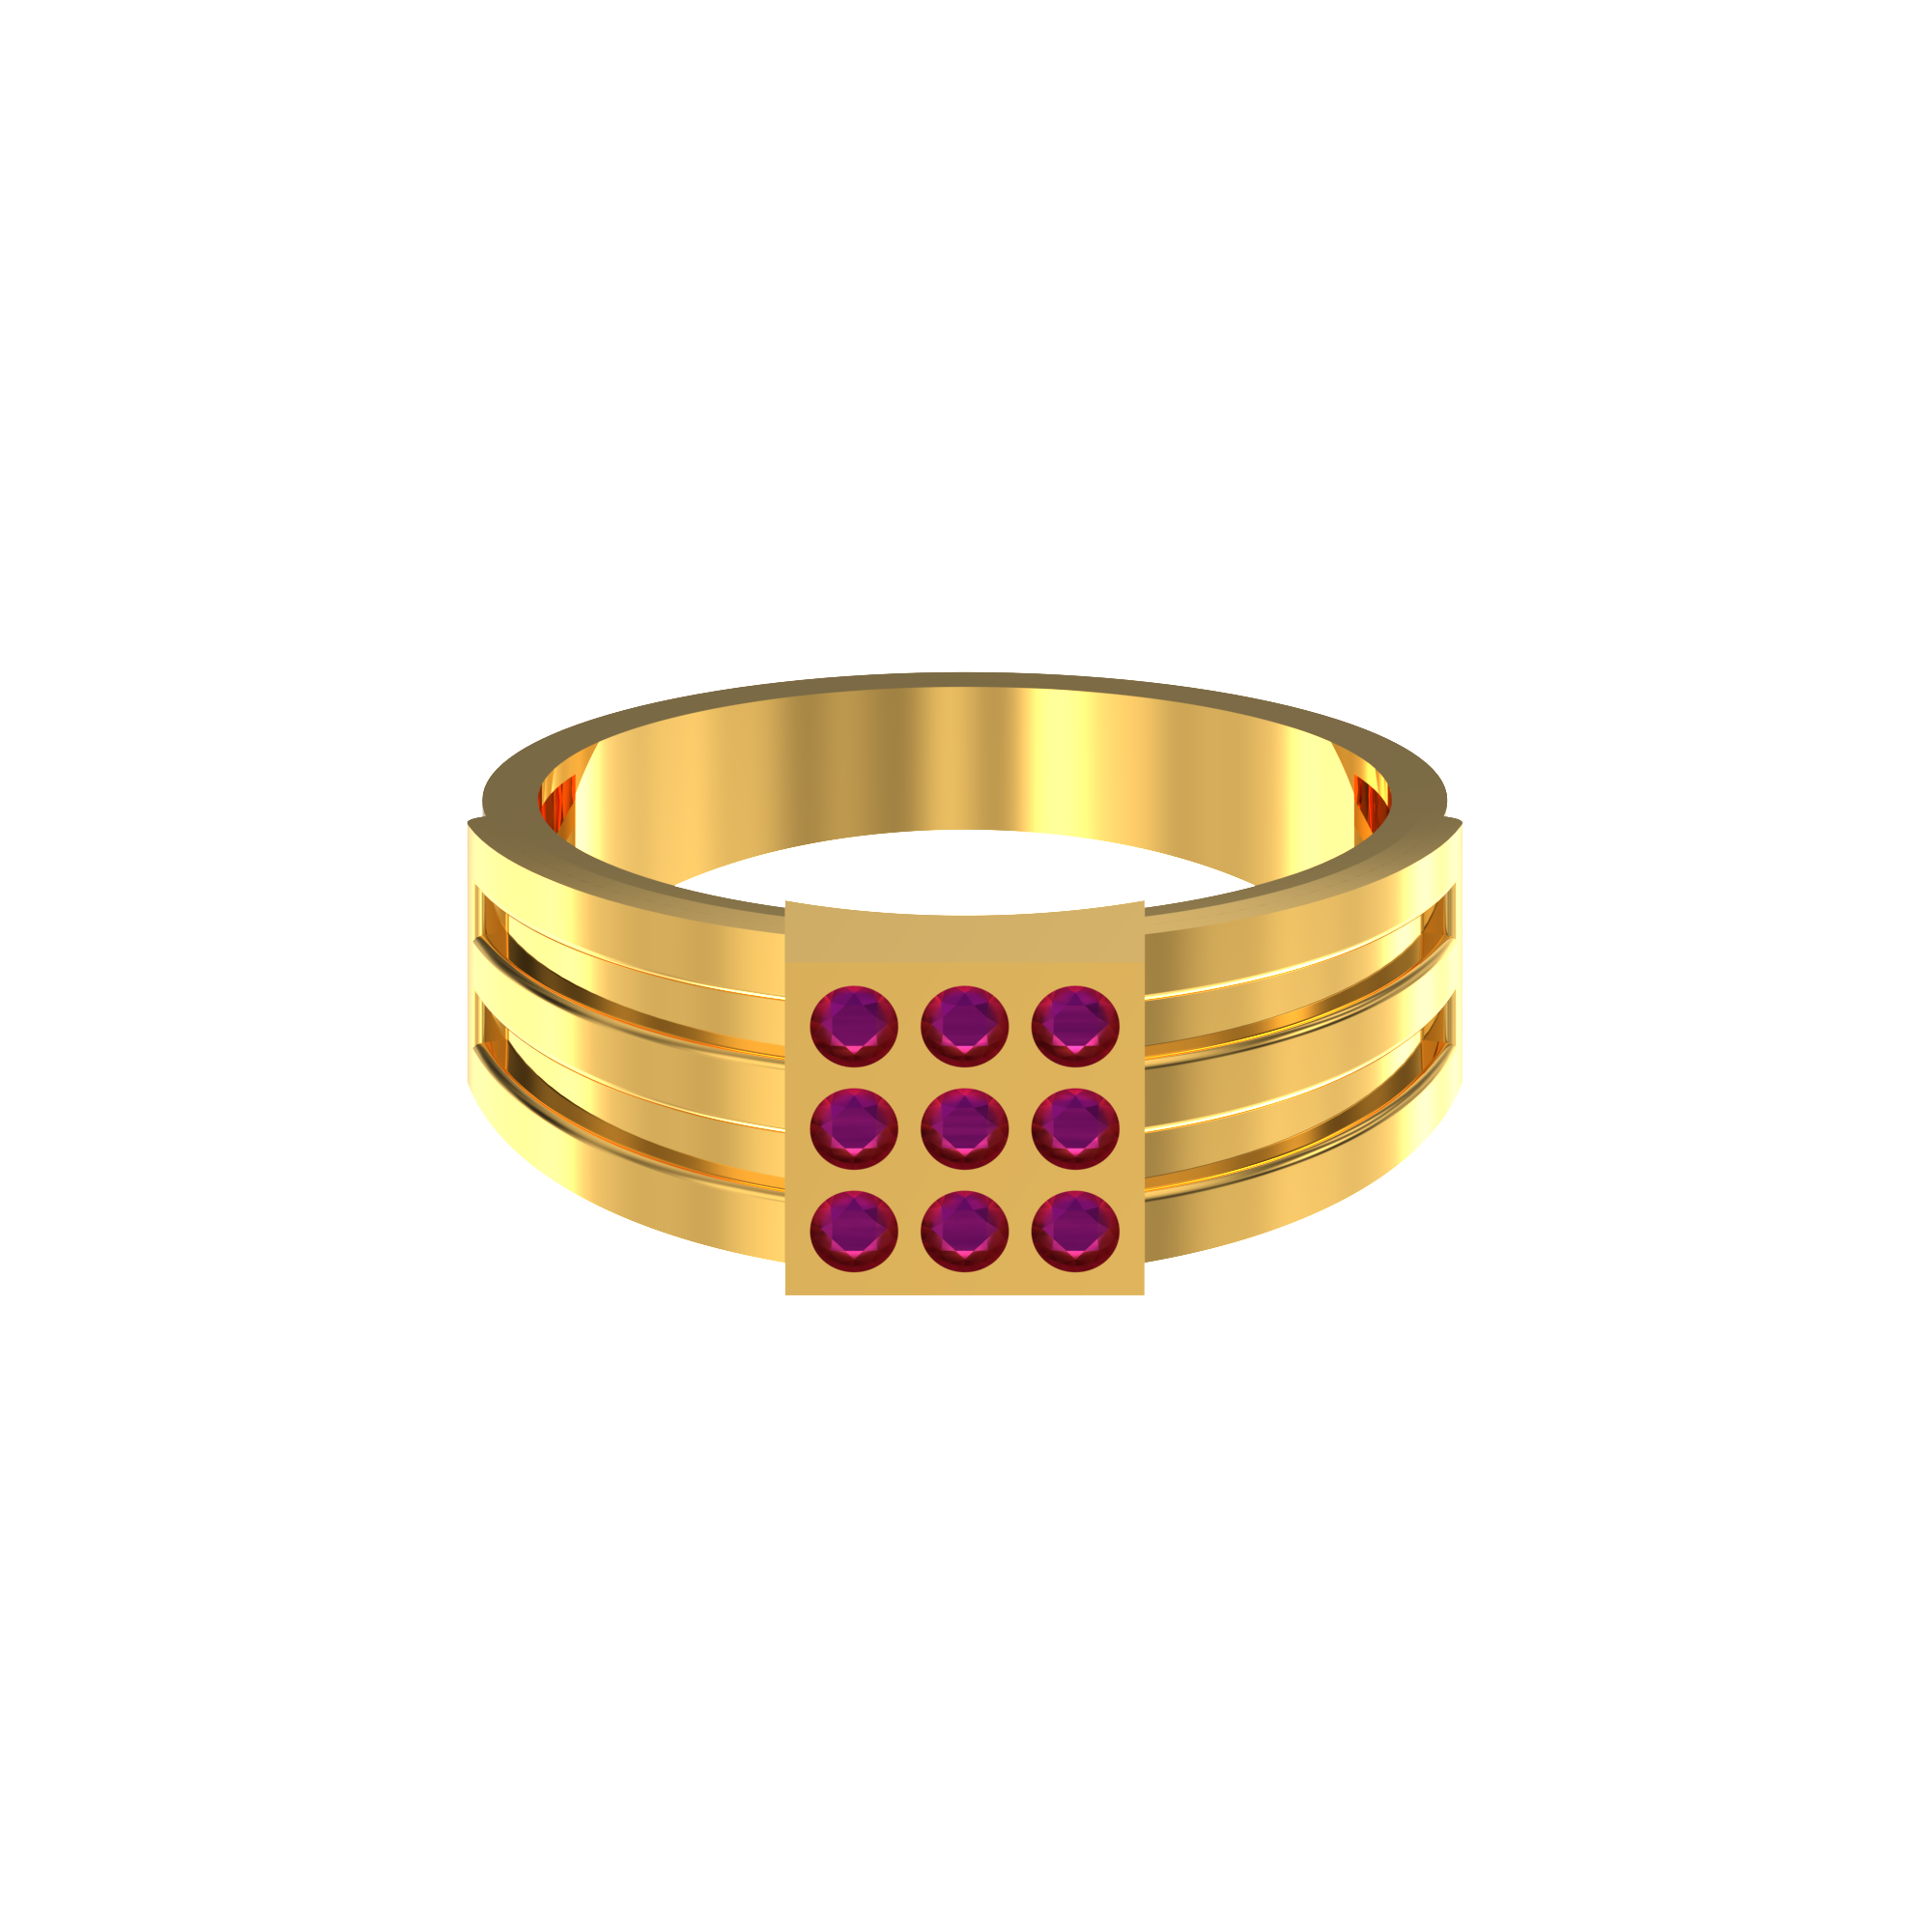 Stone Square Design Gents Gold Ring 02 04 Spe Gold